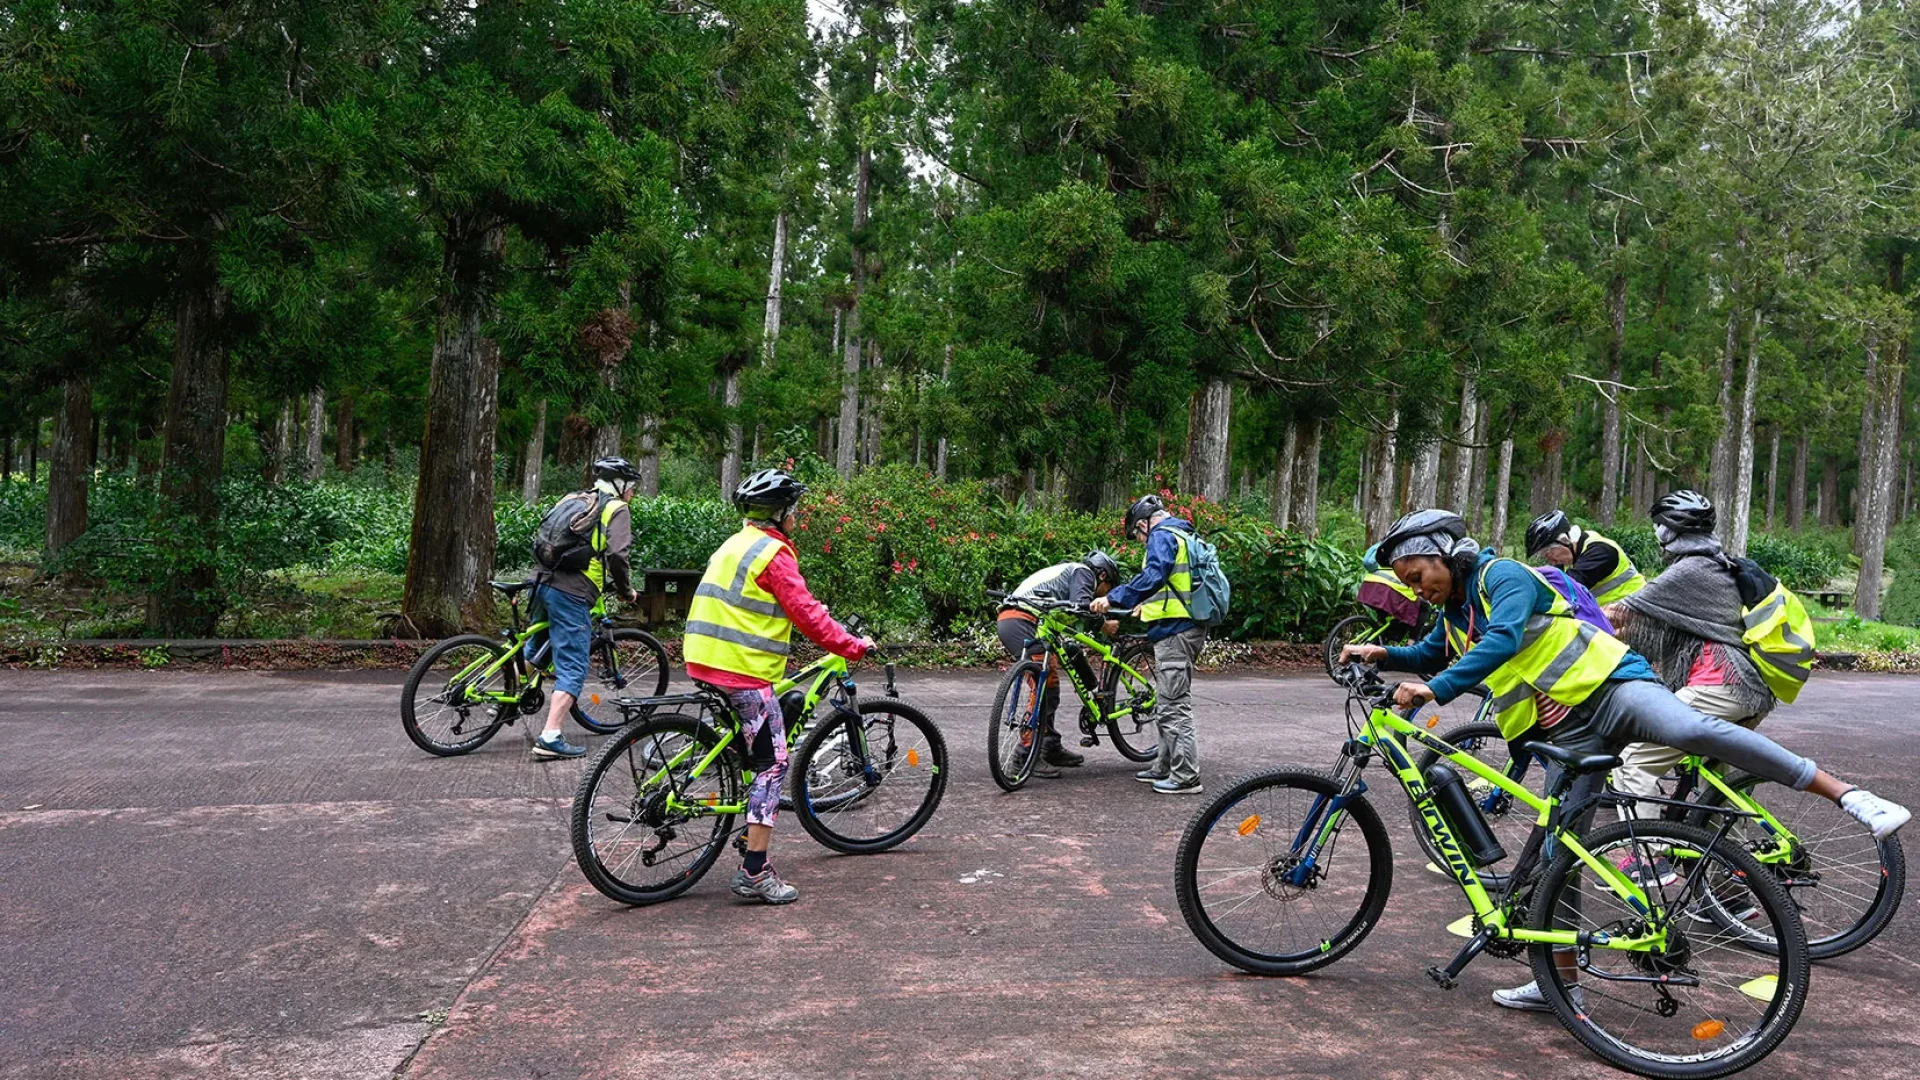 Group of people on electric mountain bikes